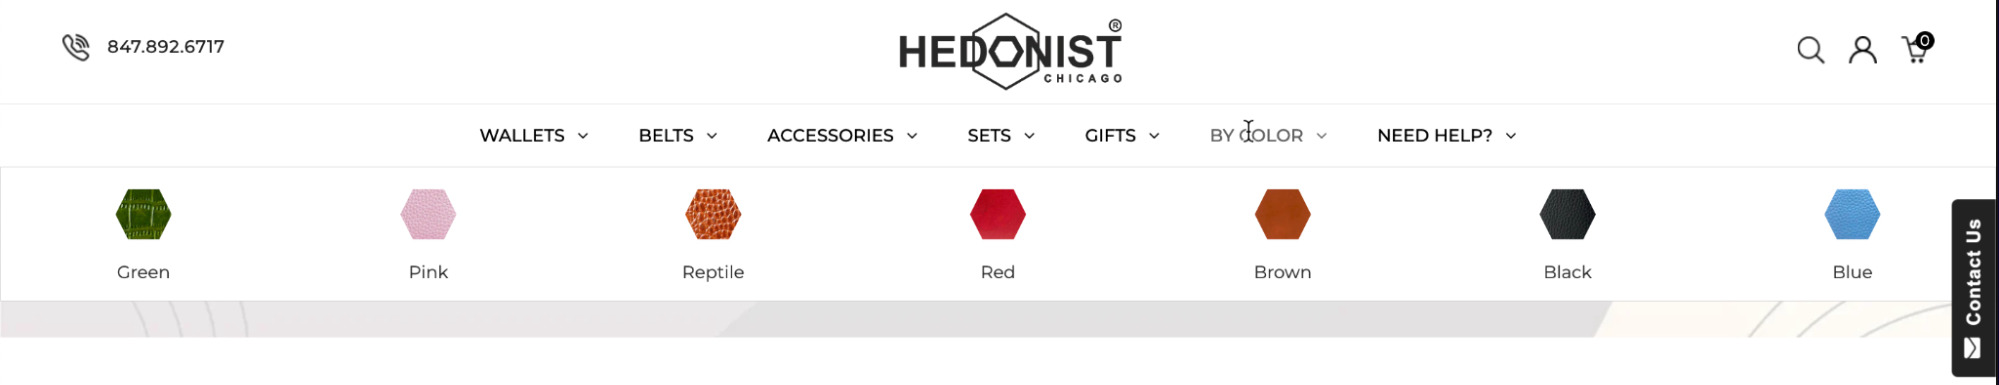 added product color categories to the site